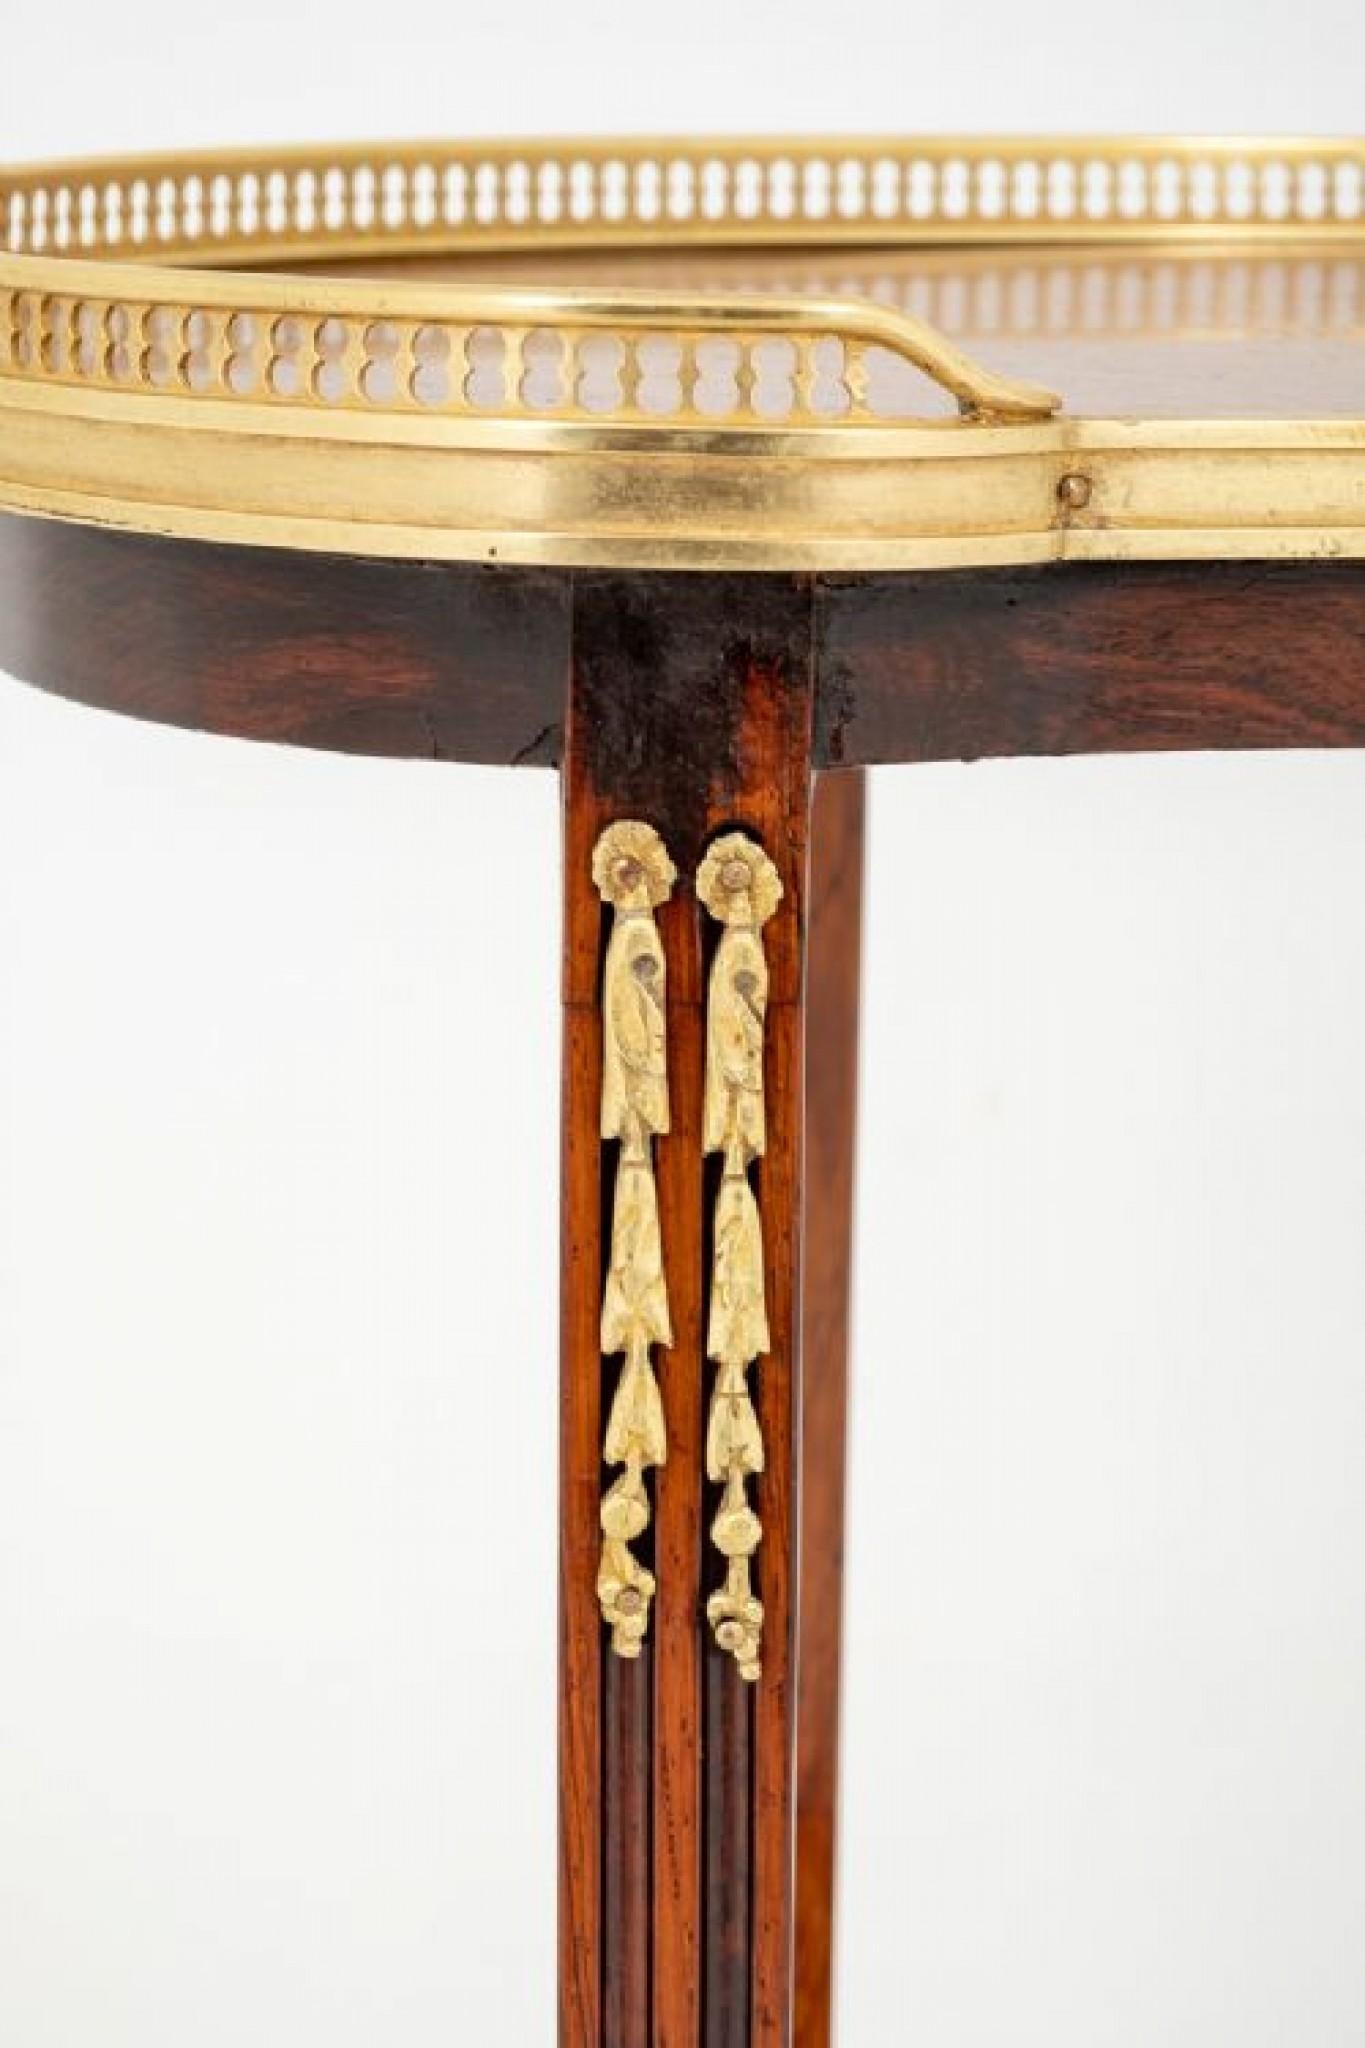 Very Pretty French side table.
This table having shaped and fluted legs with cast brass decoration.
19th century
The two shelves of the table featuring cross banding and floral marquetry inlays.
The top of the table having a cast brass